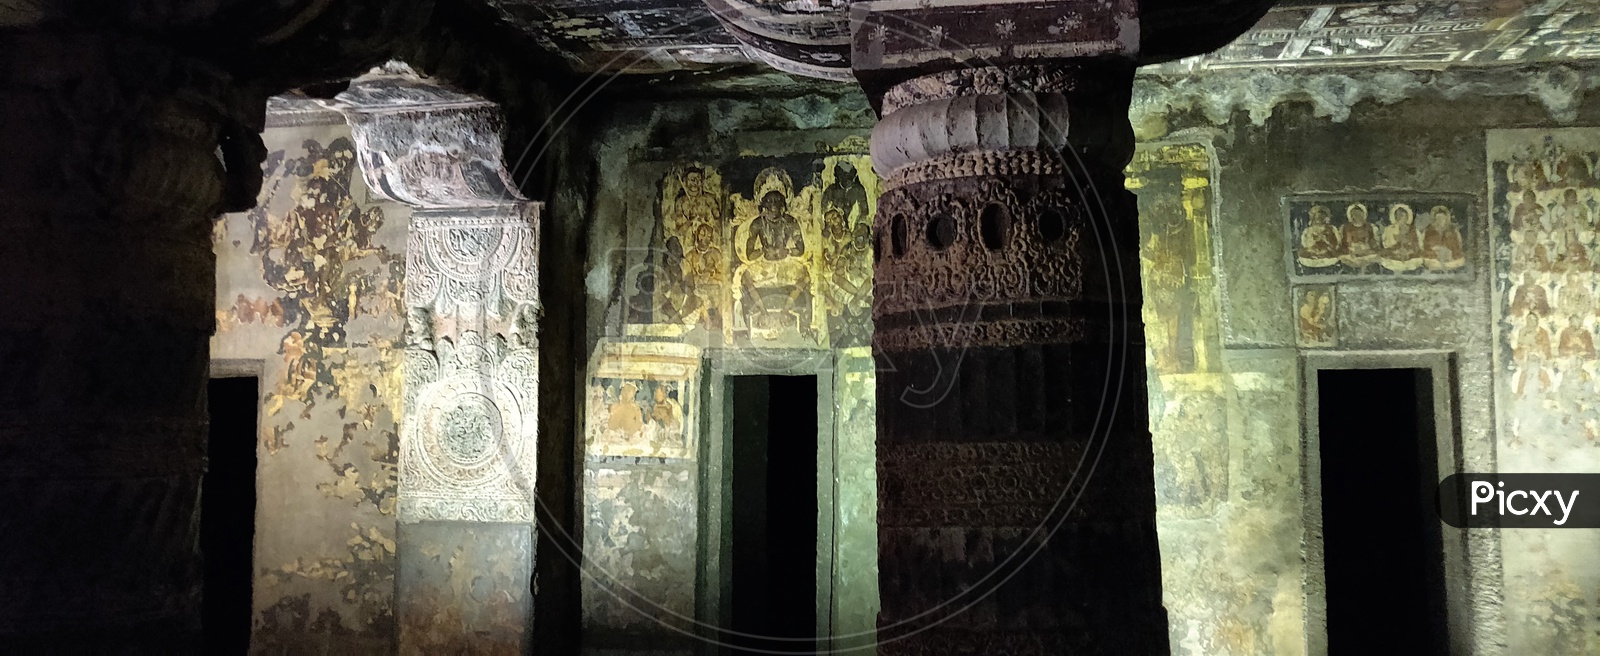 Ancient Stone Cravings of Pillars  Ajanta Caves    Or  Tourist Attraction Of  Ancient Caves At Ajanta in Deccan Plateau